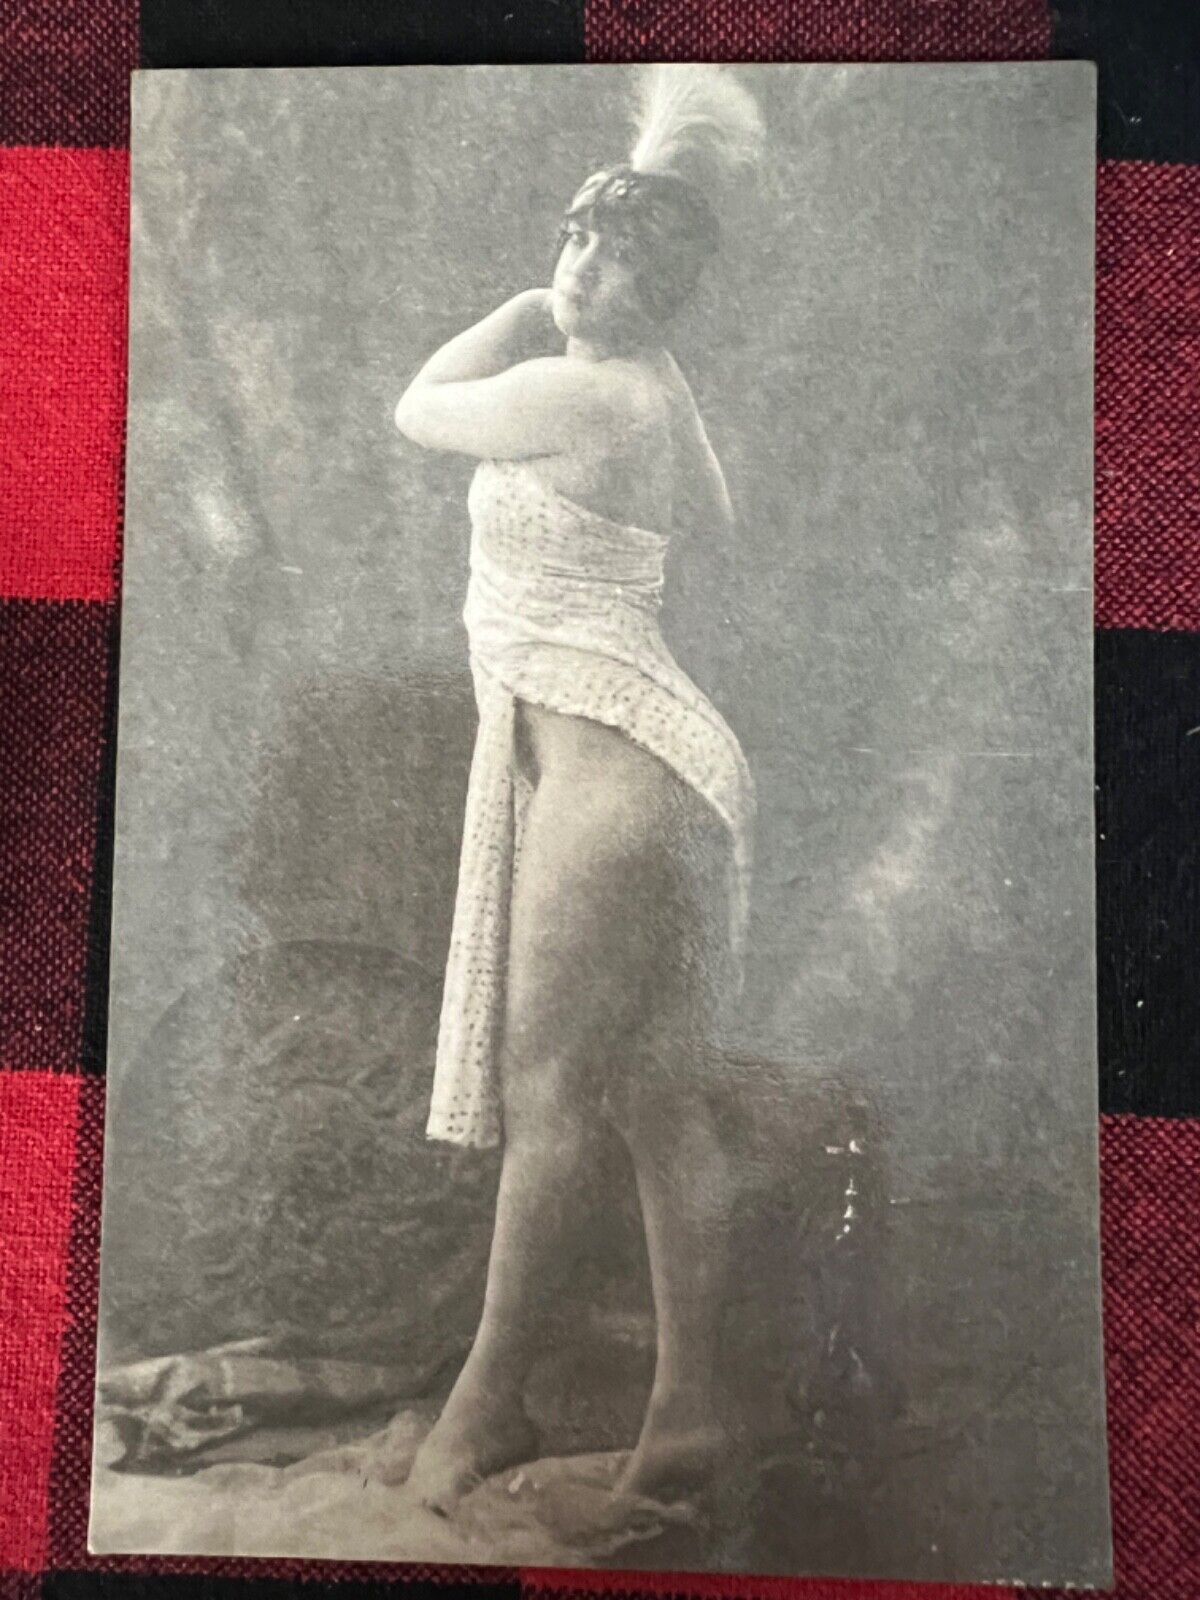 WOMAN CURVY WITH TURBAN FRENCH PHOTO POSTCARD VINTAGE ORIGINAL EARLY 1900 NUDE